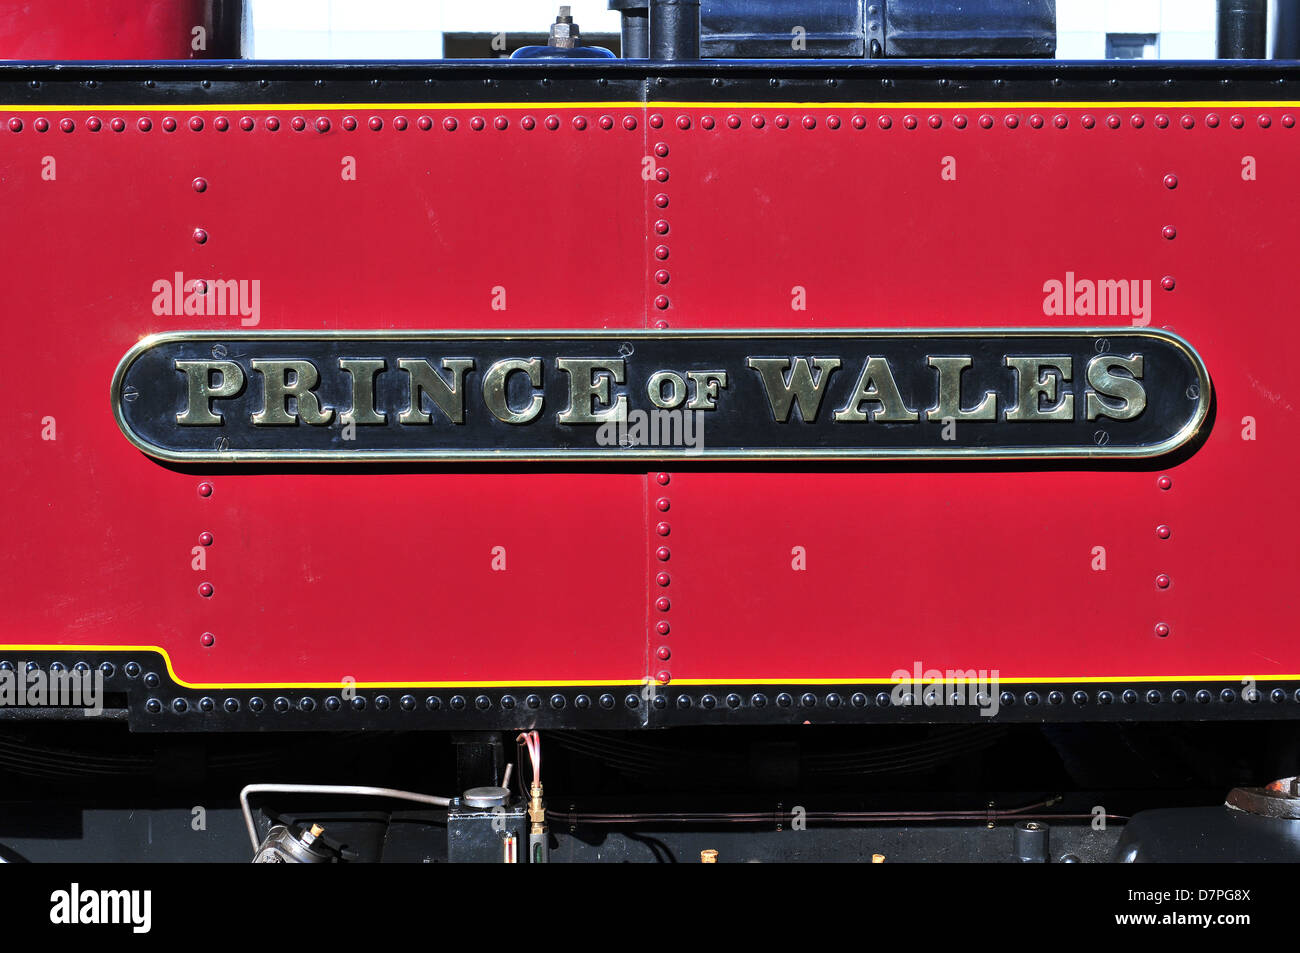 Name plate and detail of narrow gauge railway locomotive 'Prince of Wales' on the vale of Rheidol steam railway at Aberystwyth Stock Photo